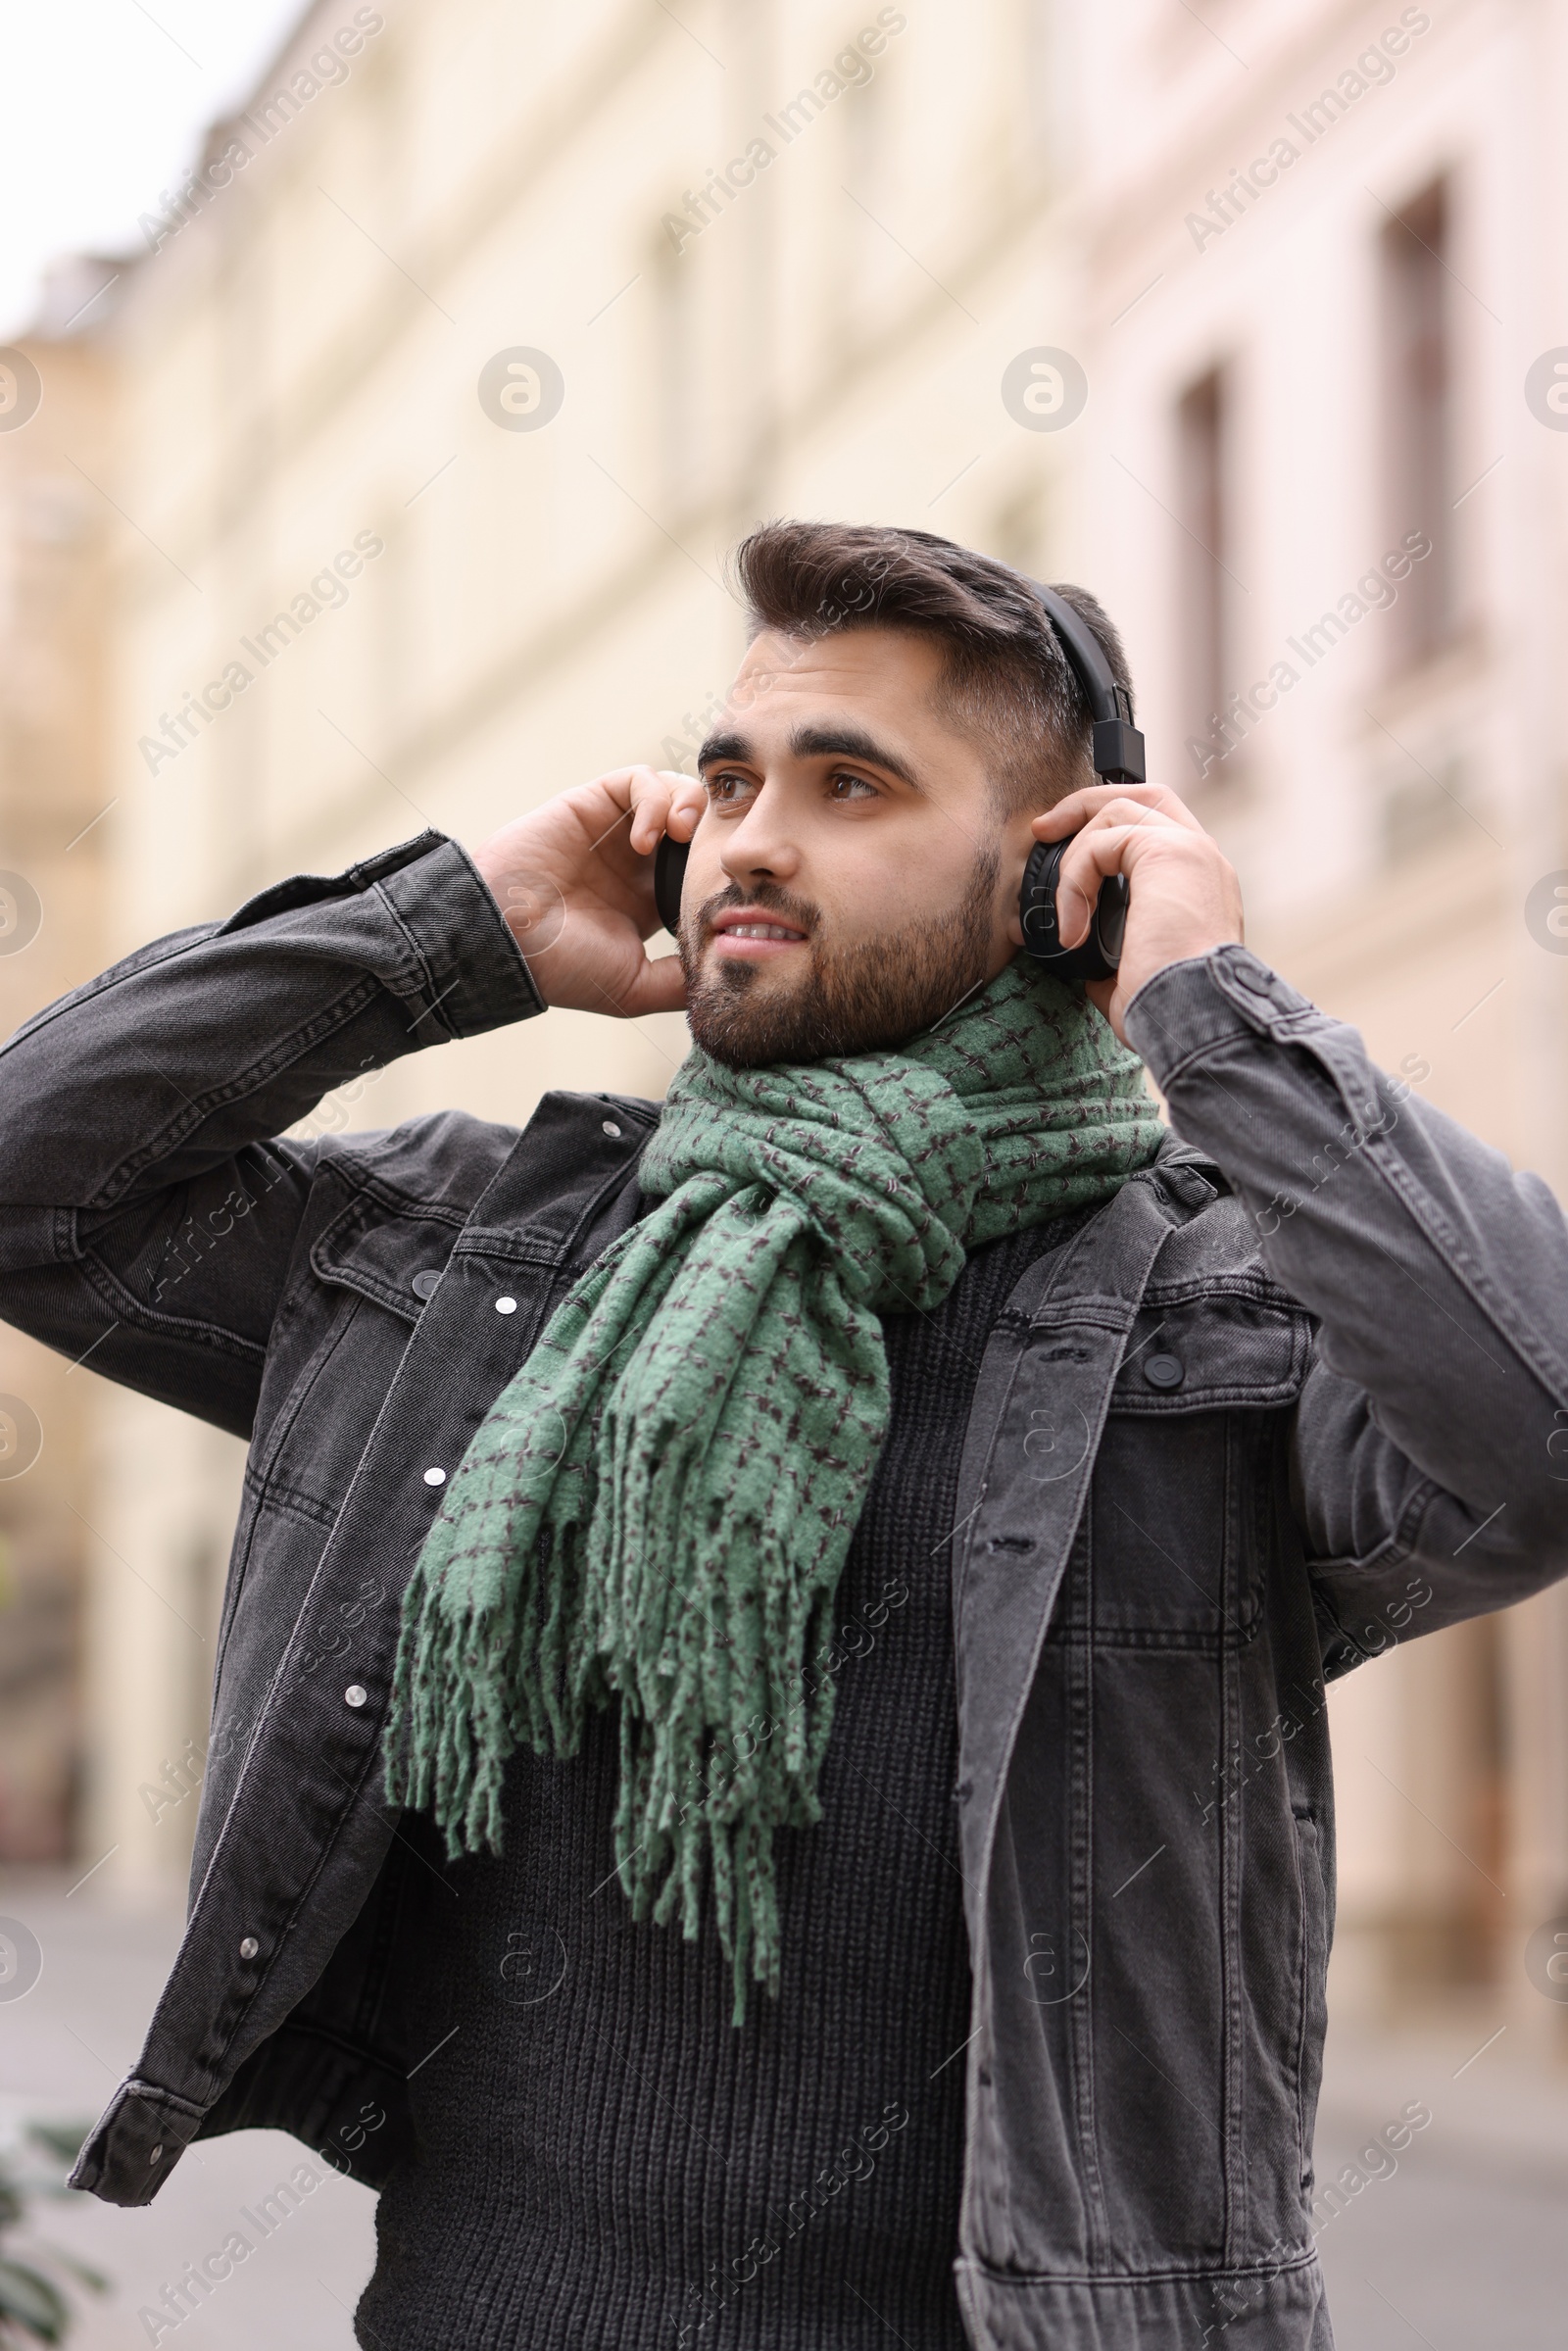 Photo of Smiling man in warm scarf listening to music outdoors